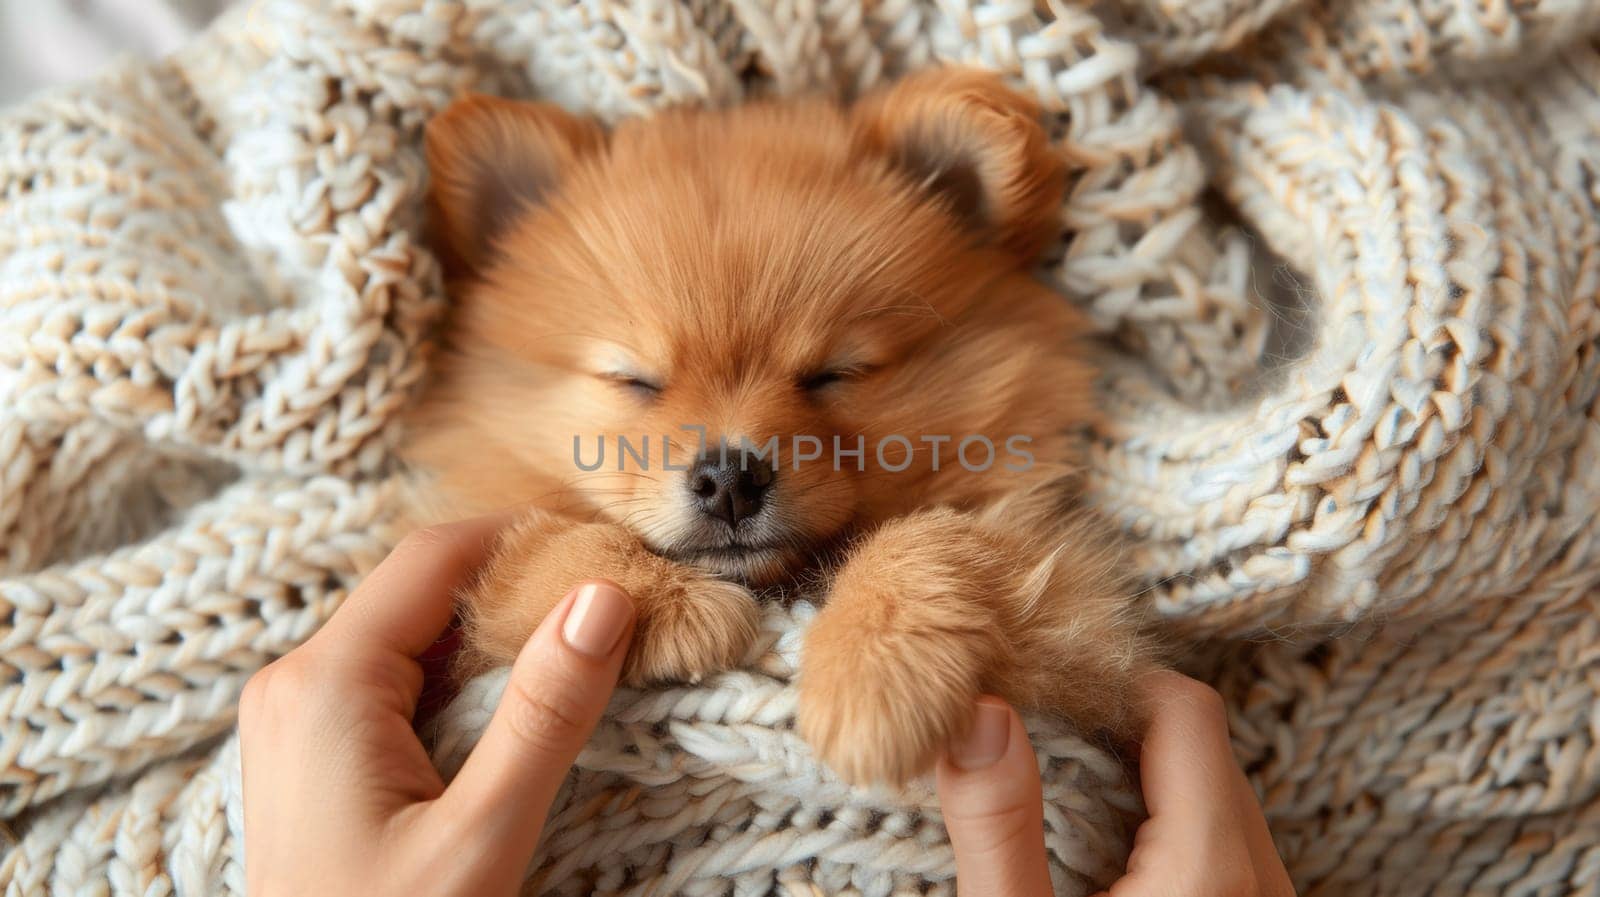 A small dog is wrapped in a blanket and being held by two hands